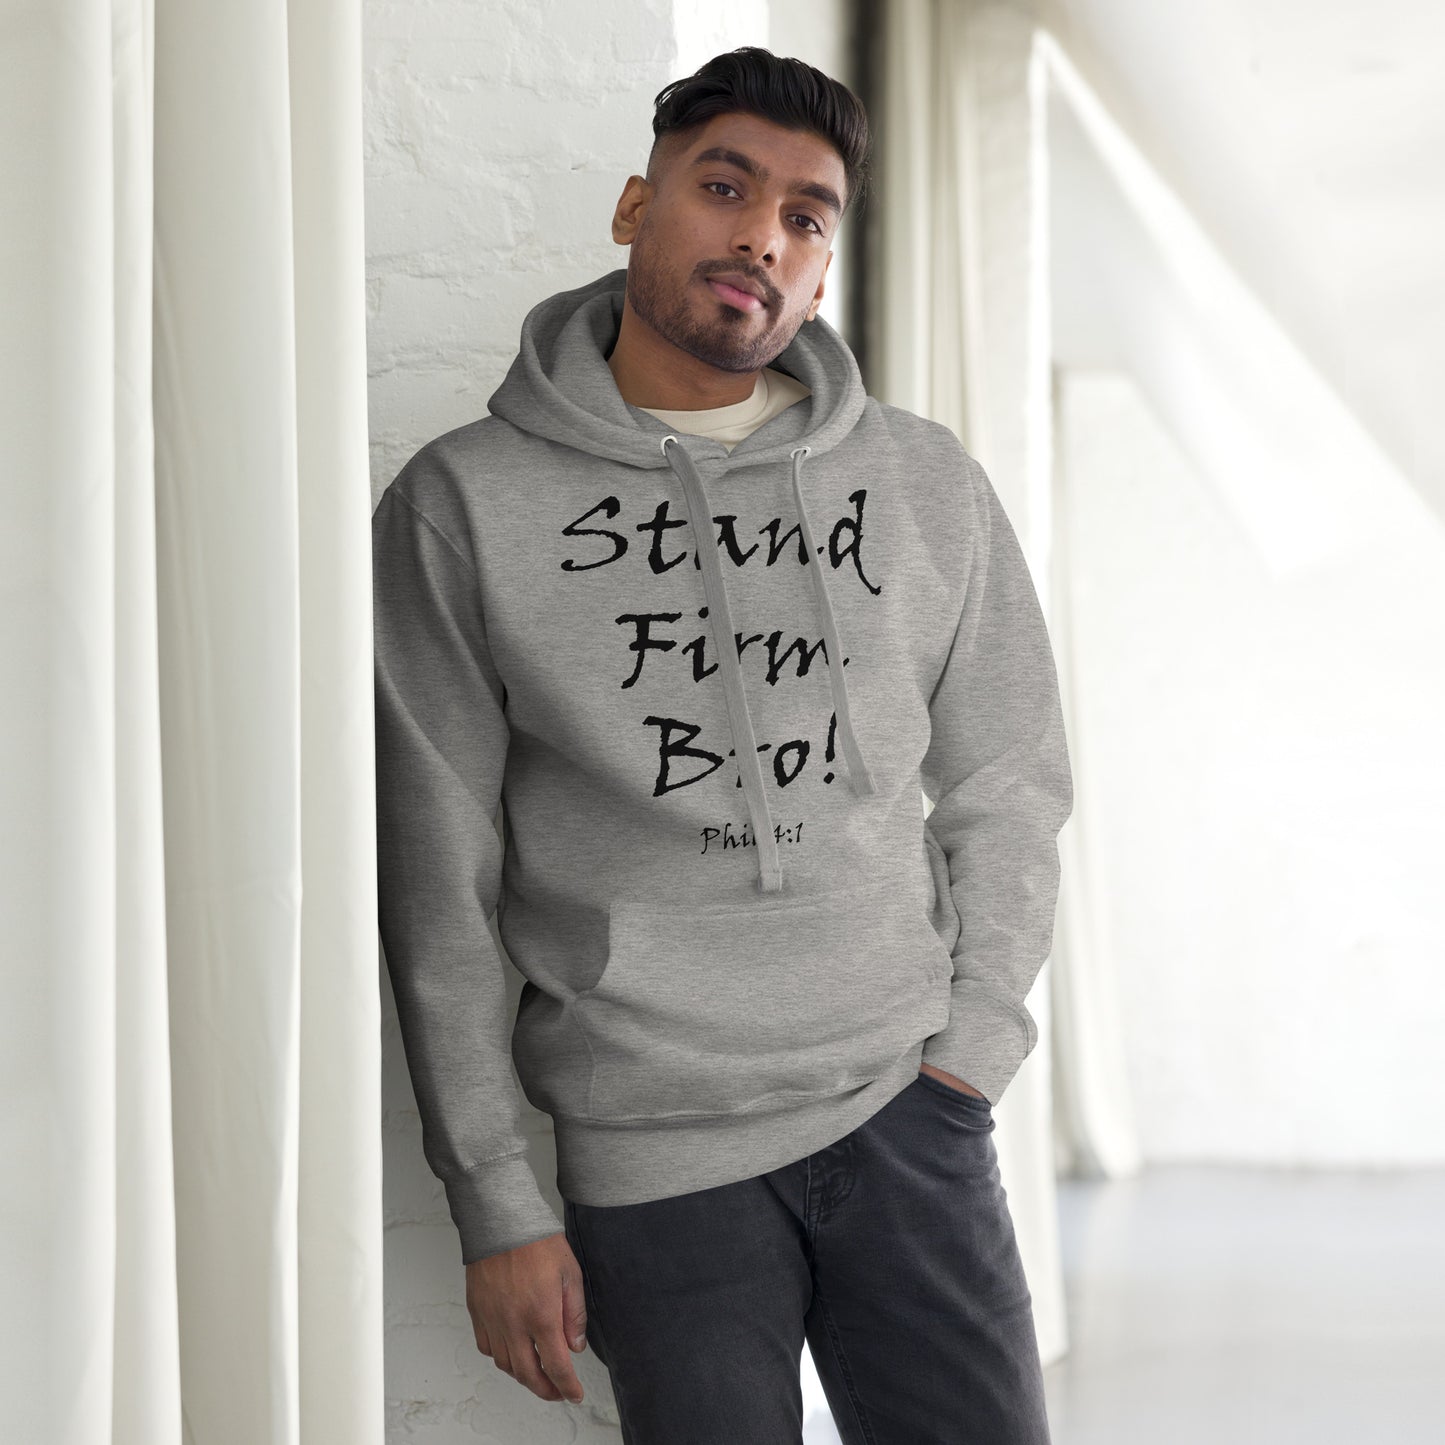 Stand Firm Bro! Unisex Hoodie - Solid Rock Designs | Christian Apparel